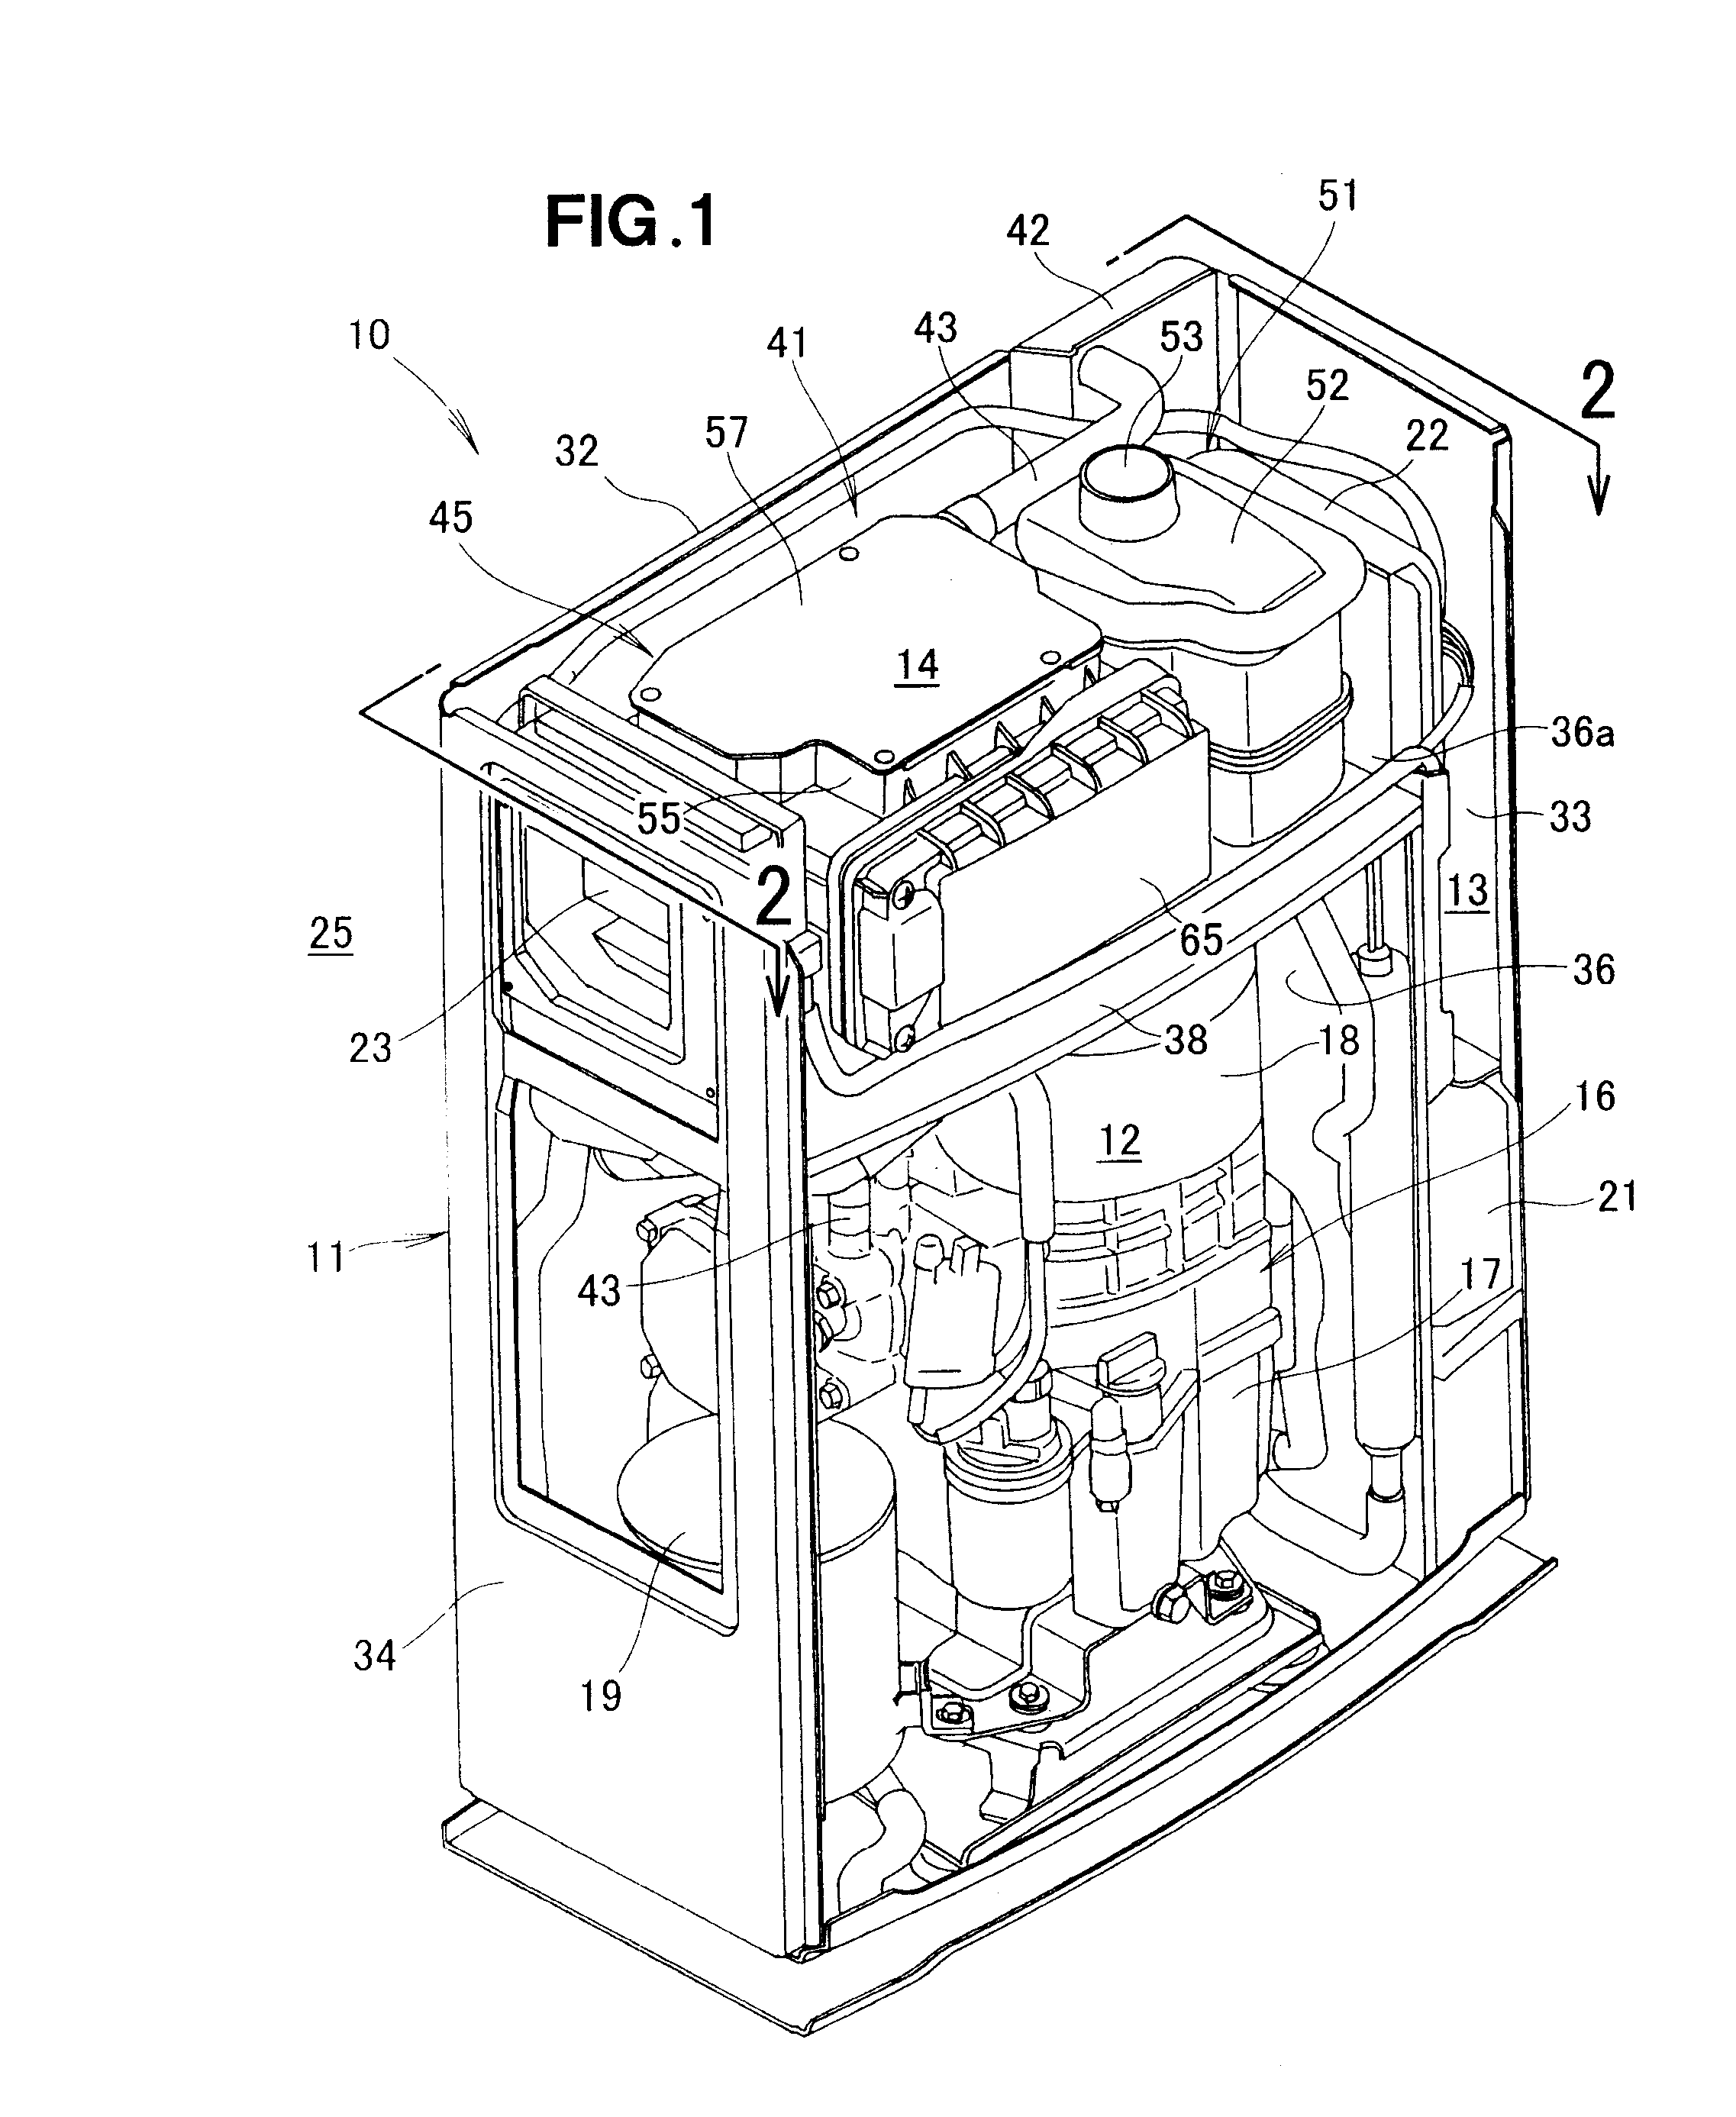 Air cleaner device